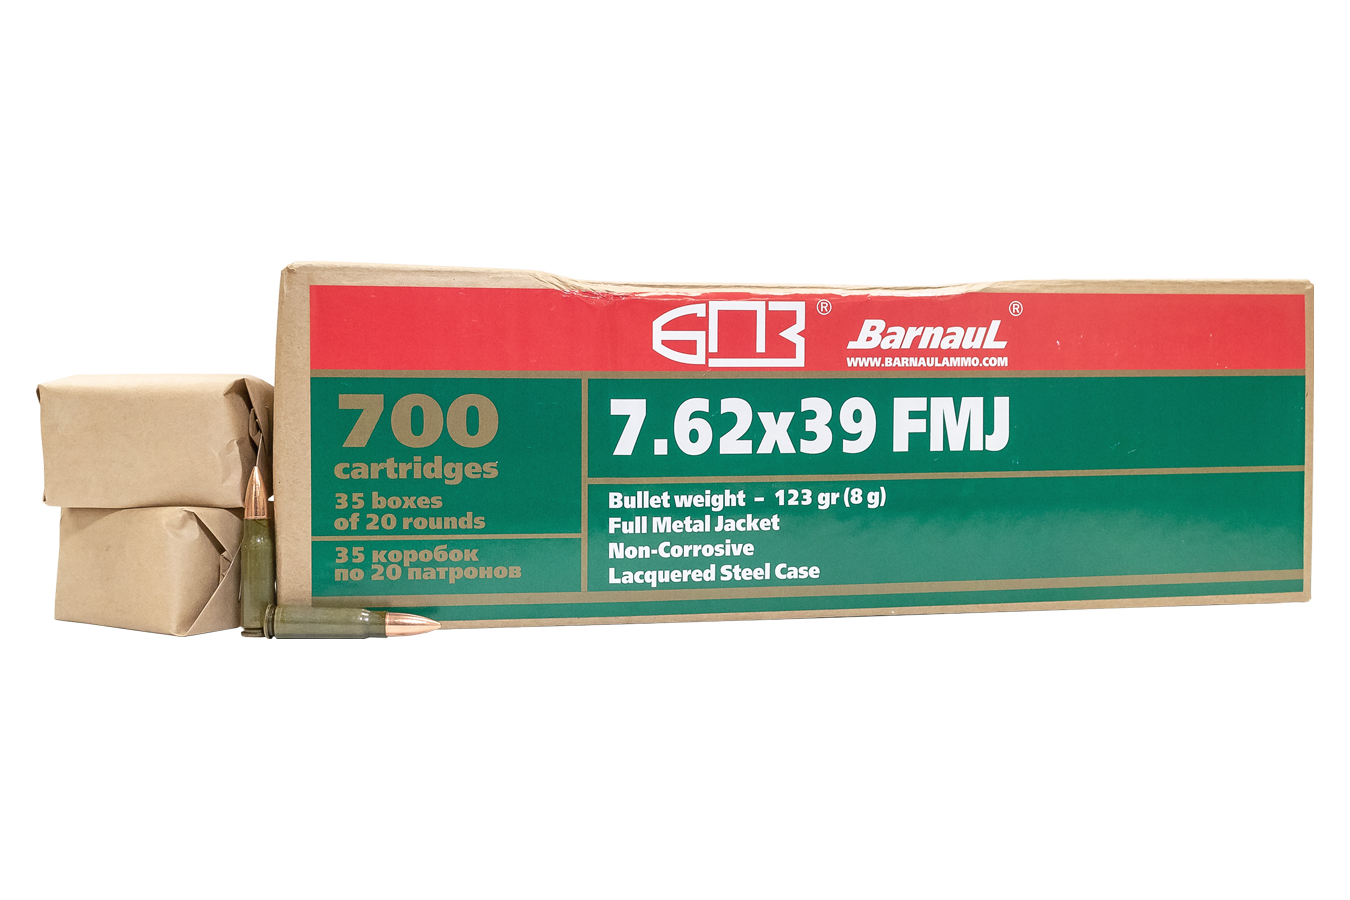 7.62X39 123 GR FMJ STEEL CASE AMMO 700 ROUNDS IN METAL SPAM CAN